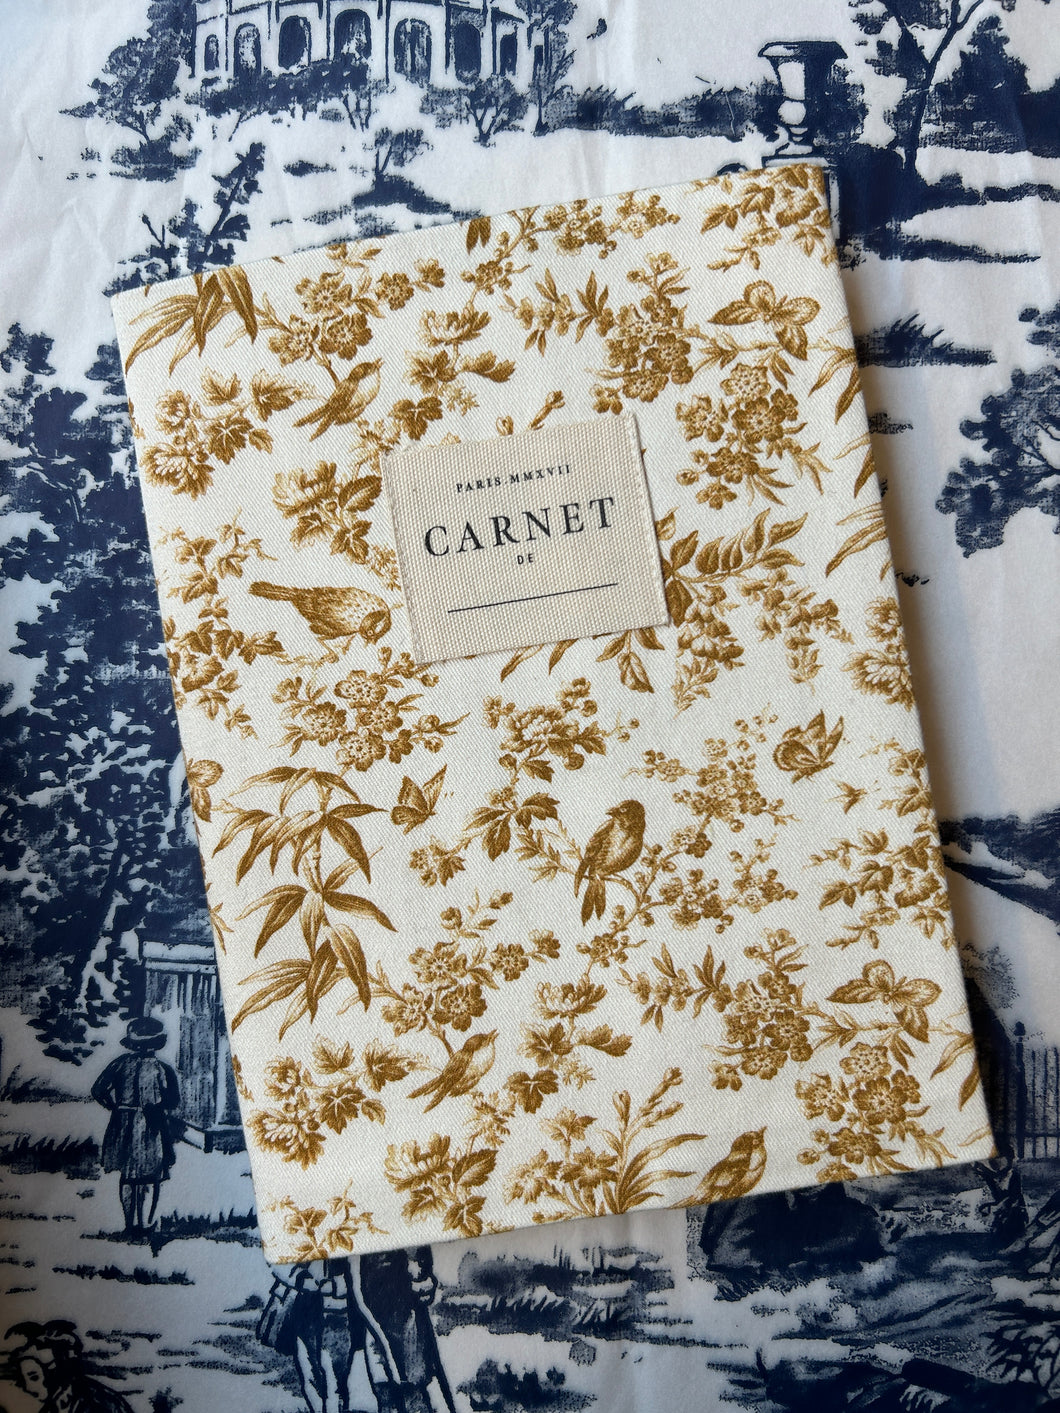 Refillable cloth cover notebook  / レフィル布カバーノート / Carnet rechargeable à couverture en tissu